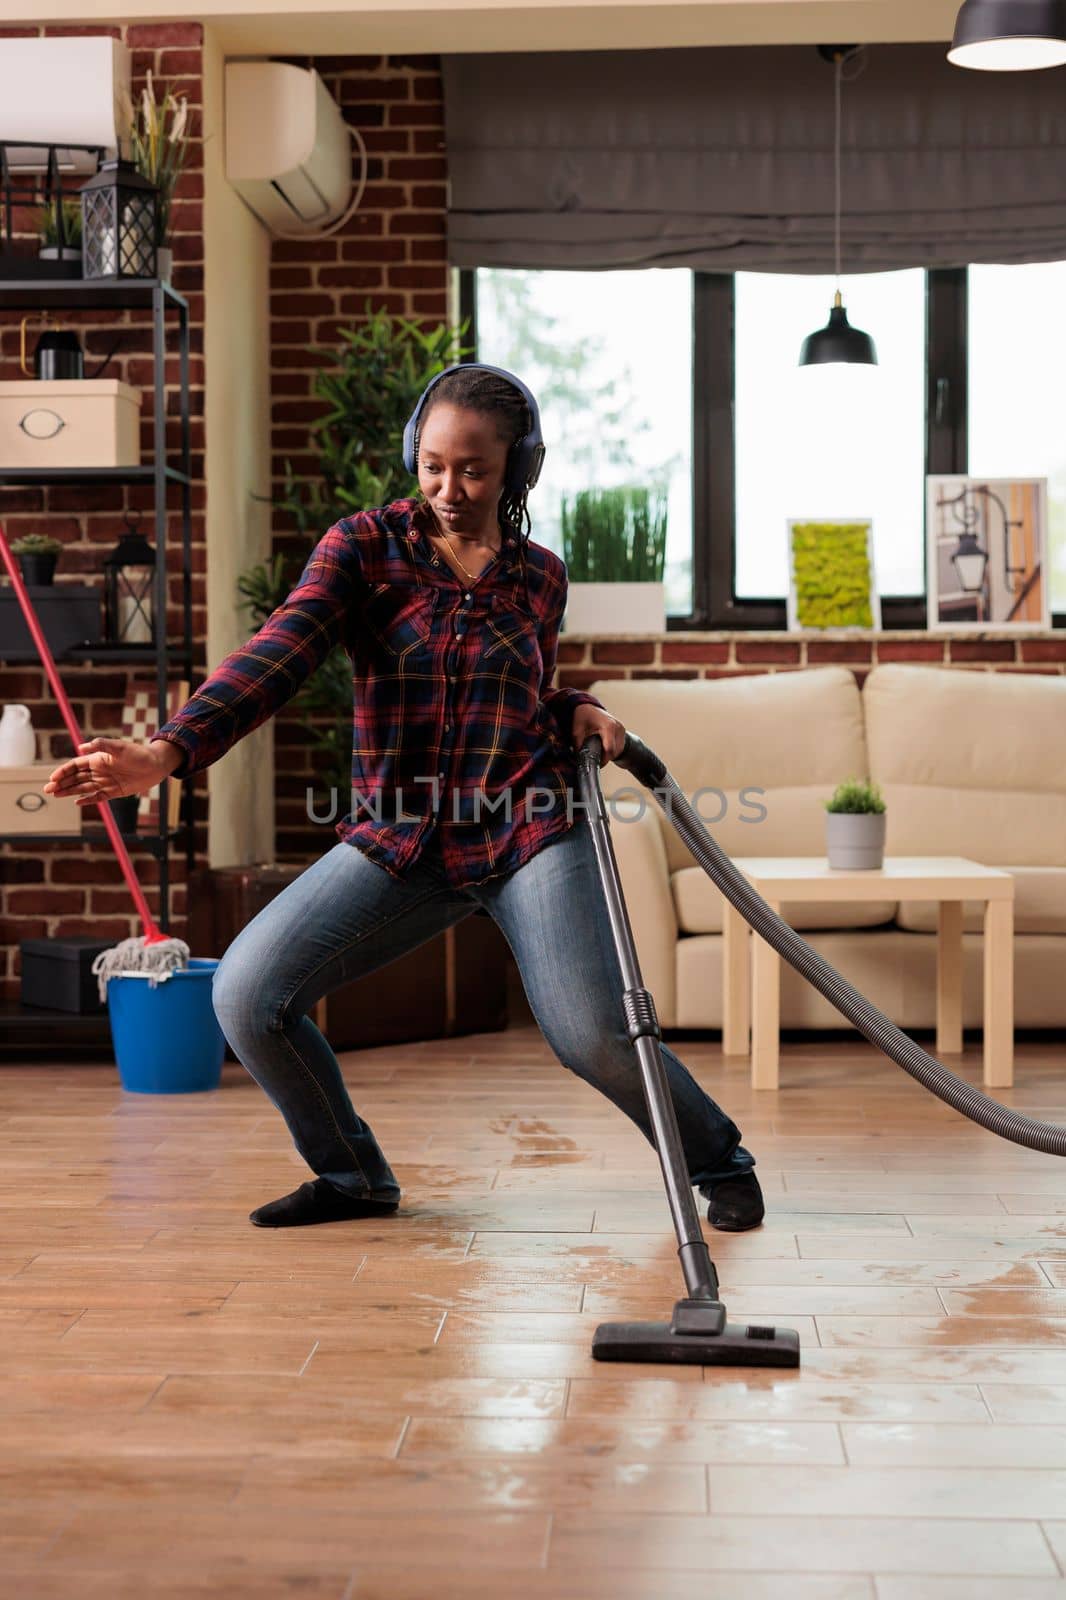 Positive housewife enjoying spring cleaning at home, singing while vacuuming in living room. Listening to music with wireless headphones relaxed looking cheerful, taking care of finishing household chores.